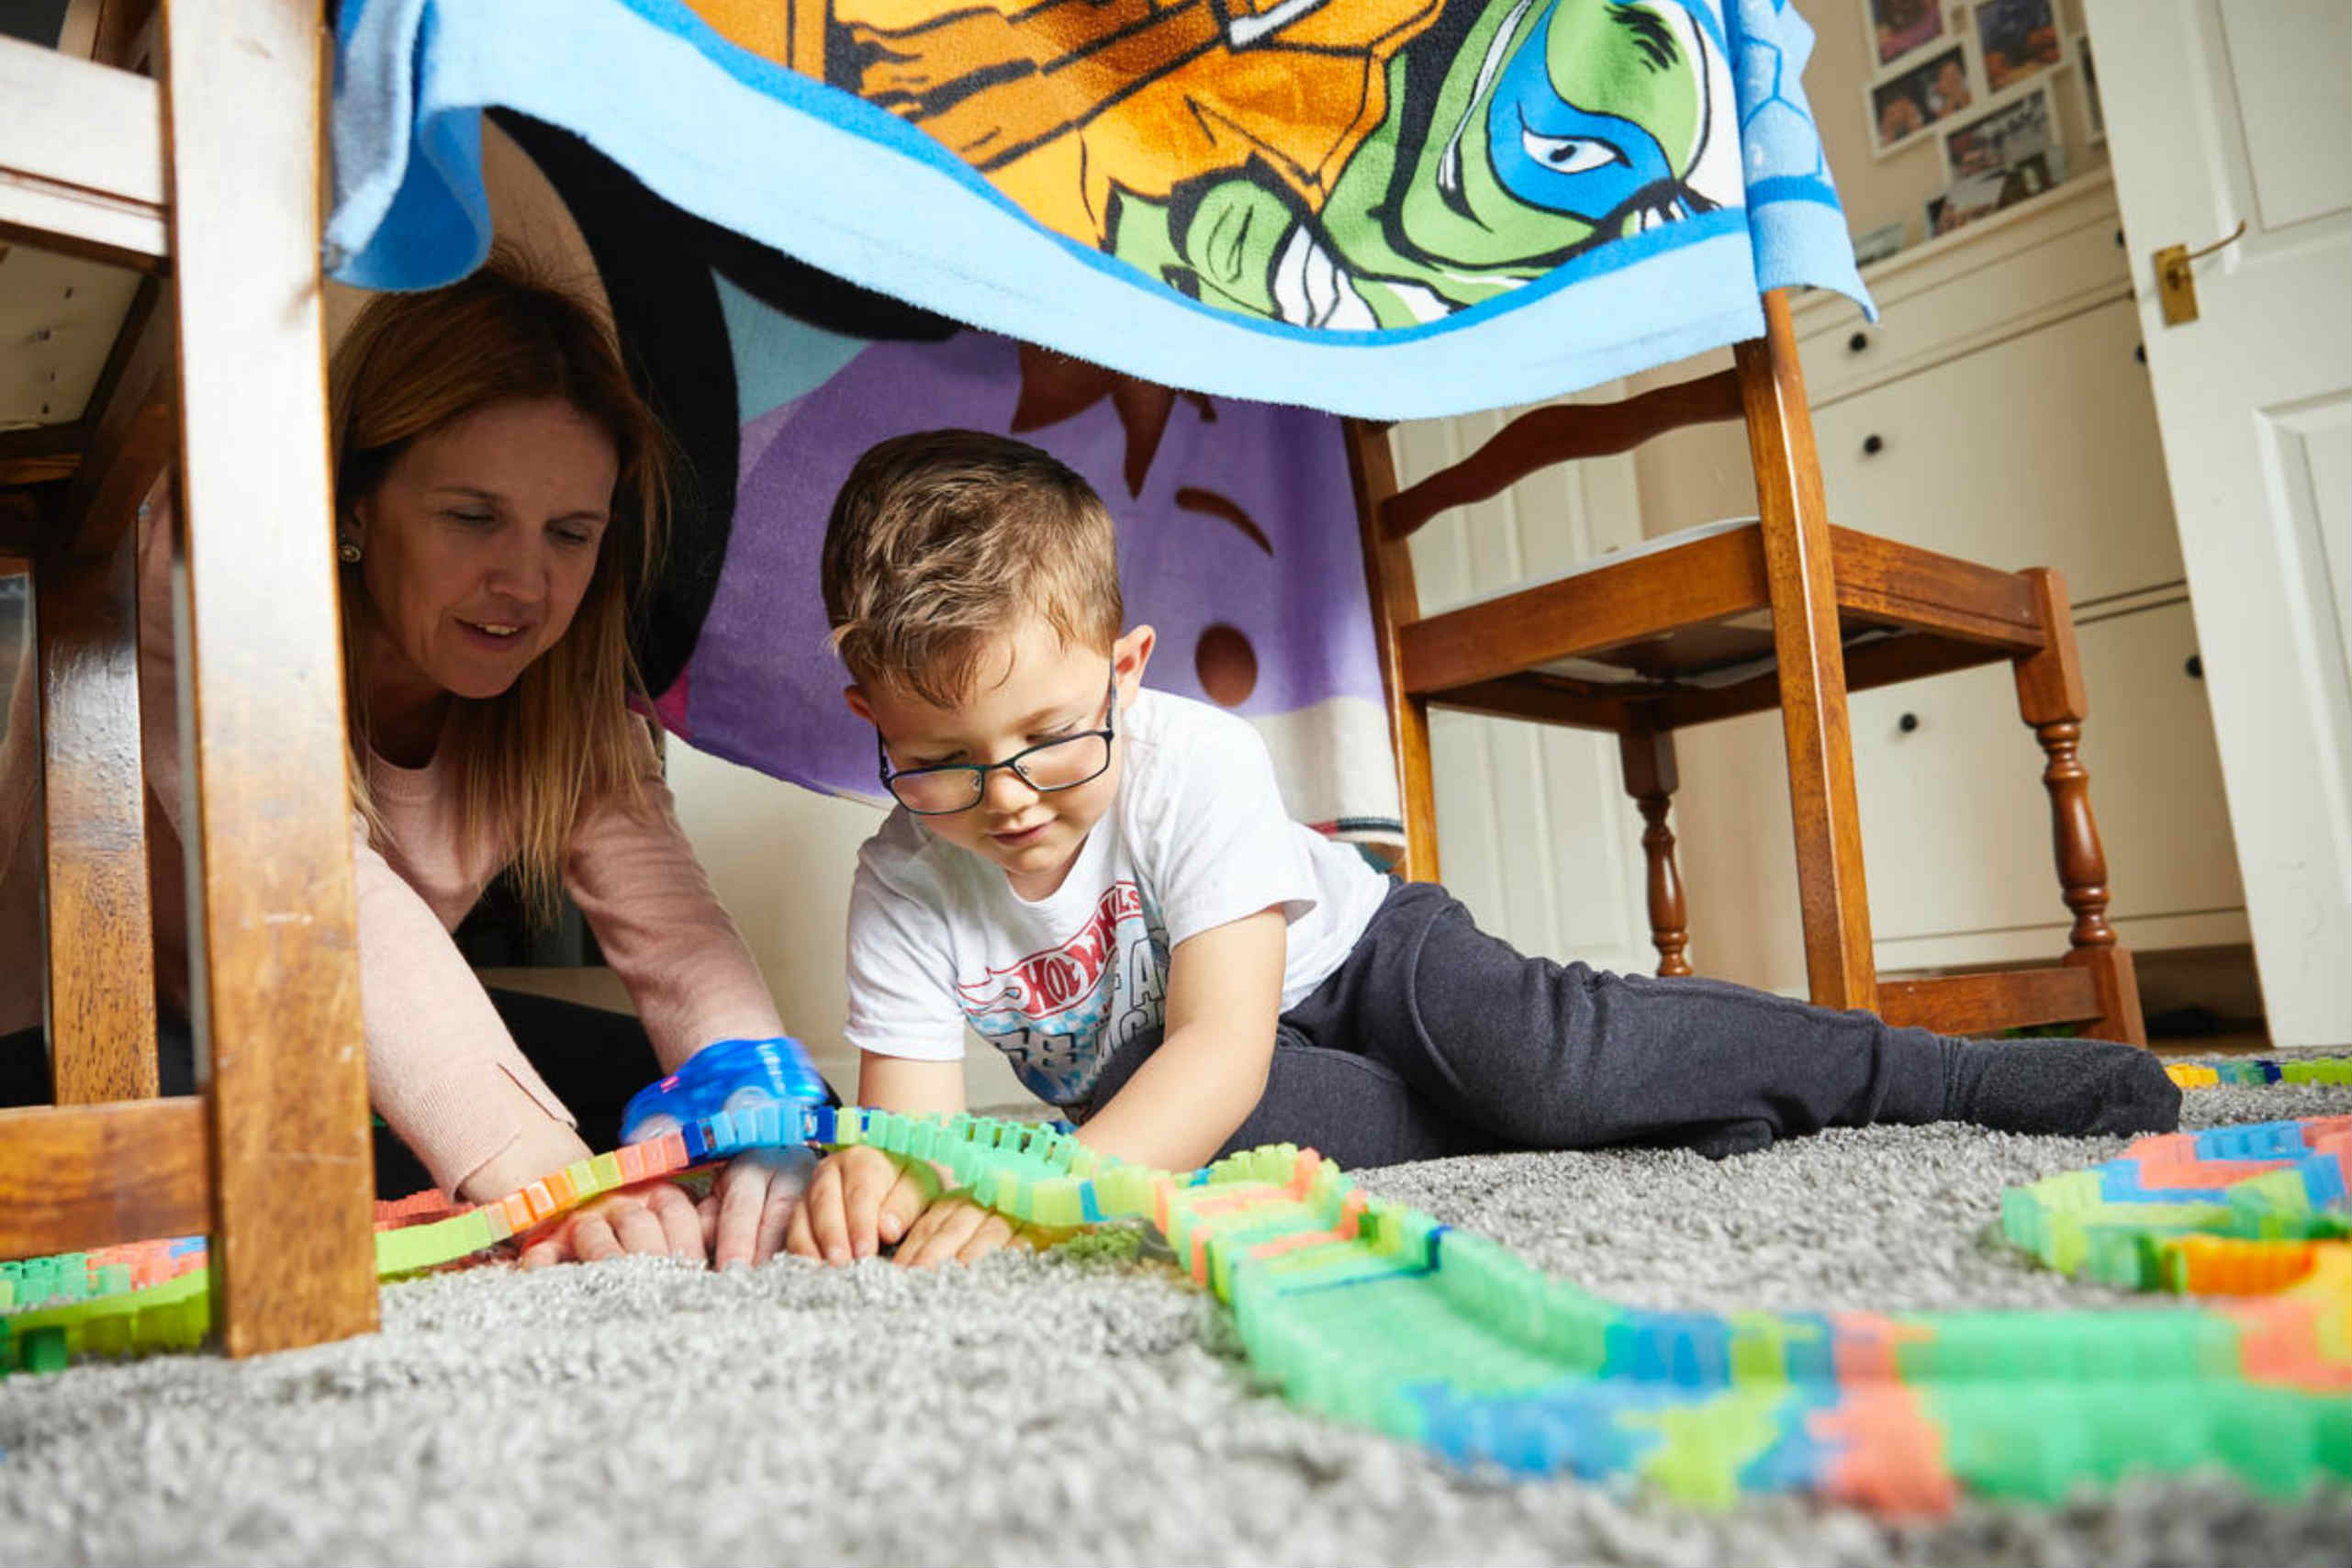 Flavianna and her son Daniel, 4, play inside a homemade tent in their living room, Manchester